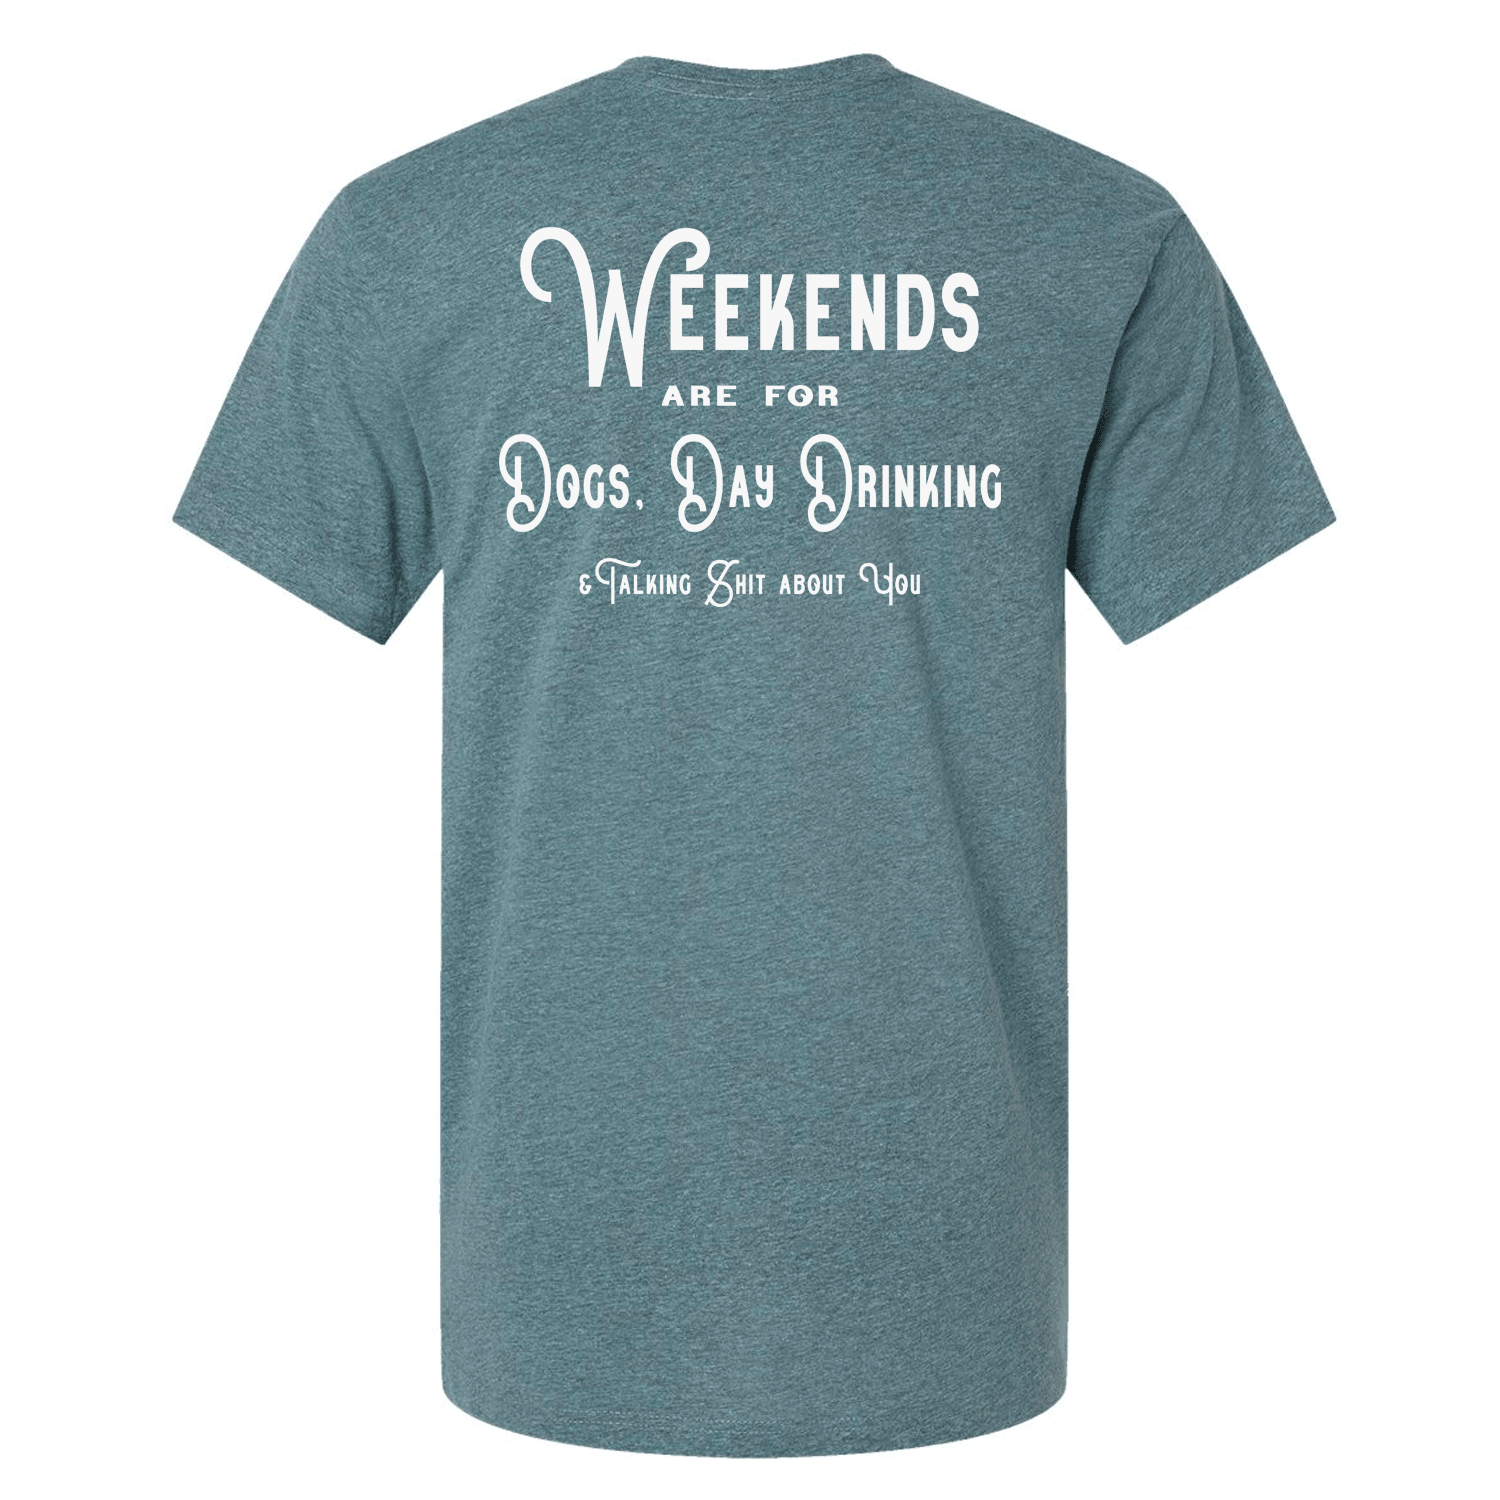 Weekends are for Dogs,Day Drinking...T-Shirt - Ales to Trails